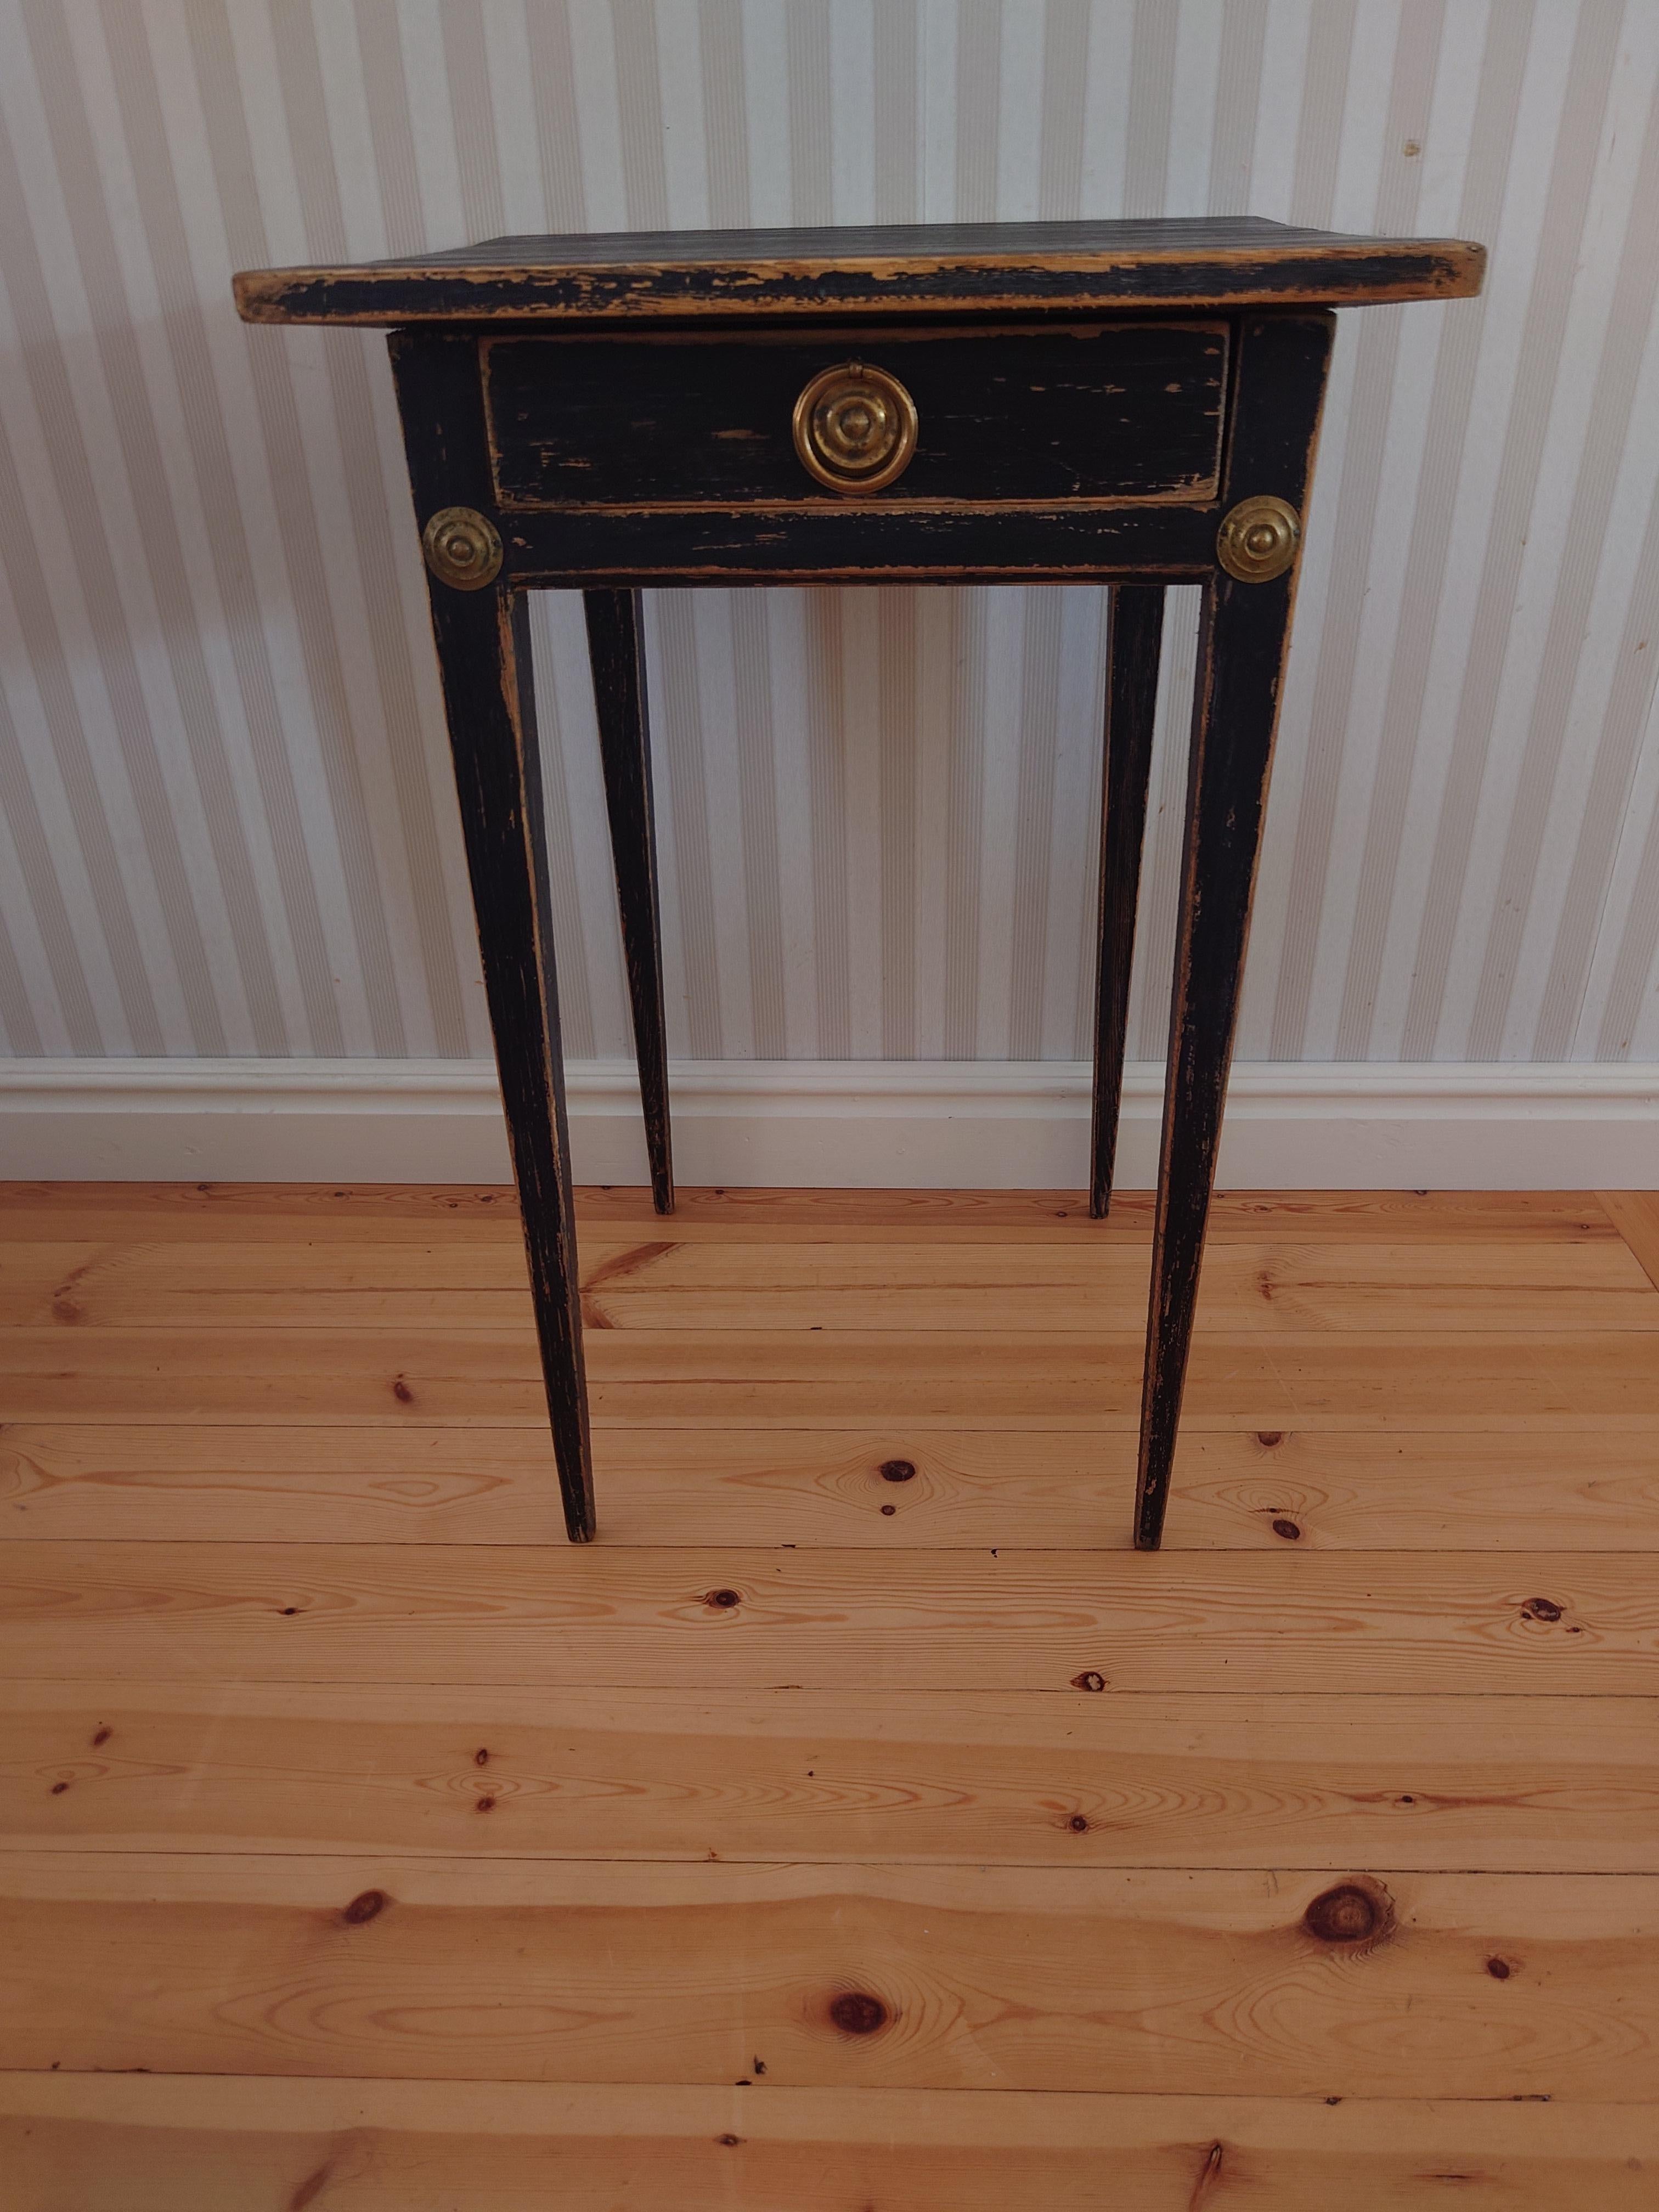 Black  Gustavian side table  from the early 19th century, 1820 to 1840. The table is a classic country house furniture from Sweden and made in pine. The black paint is later and distressed, making some of the pine underneath shine trough. It has the